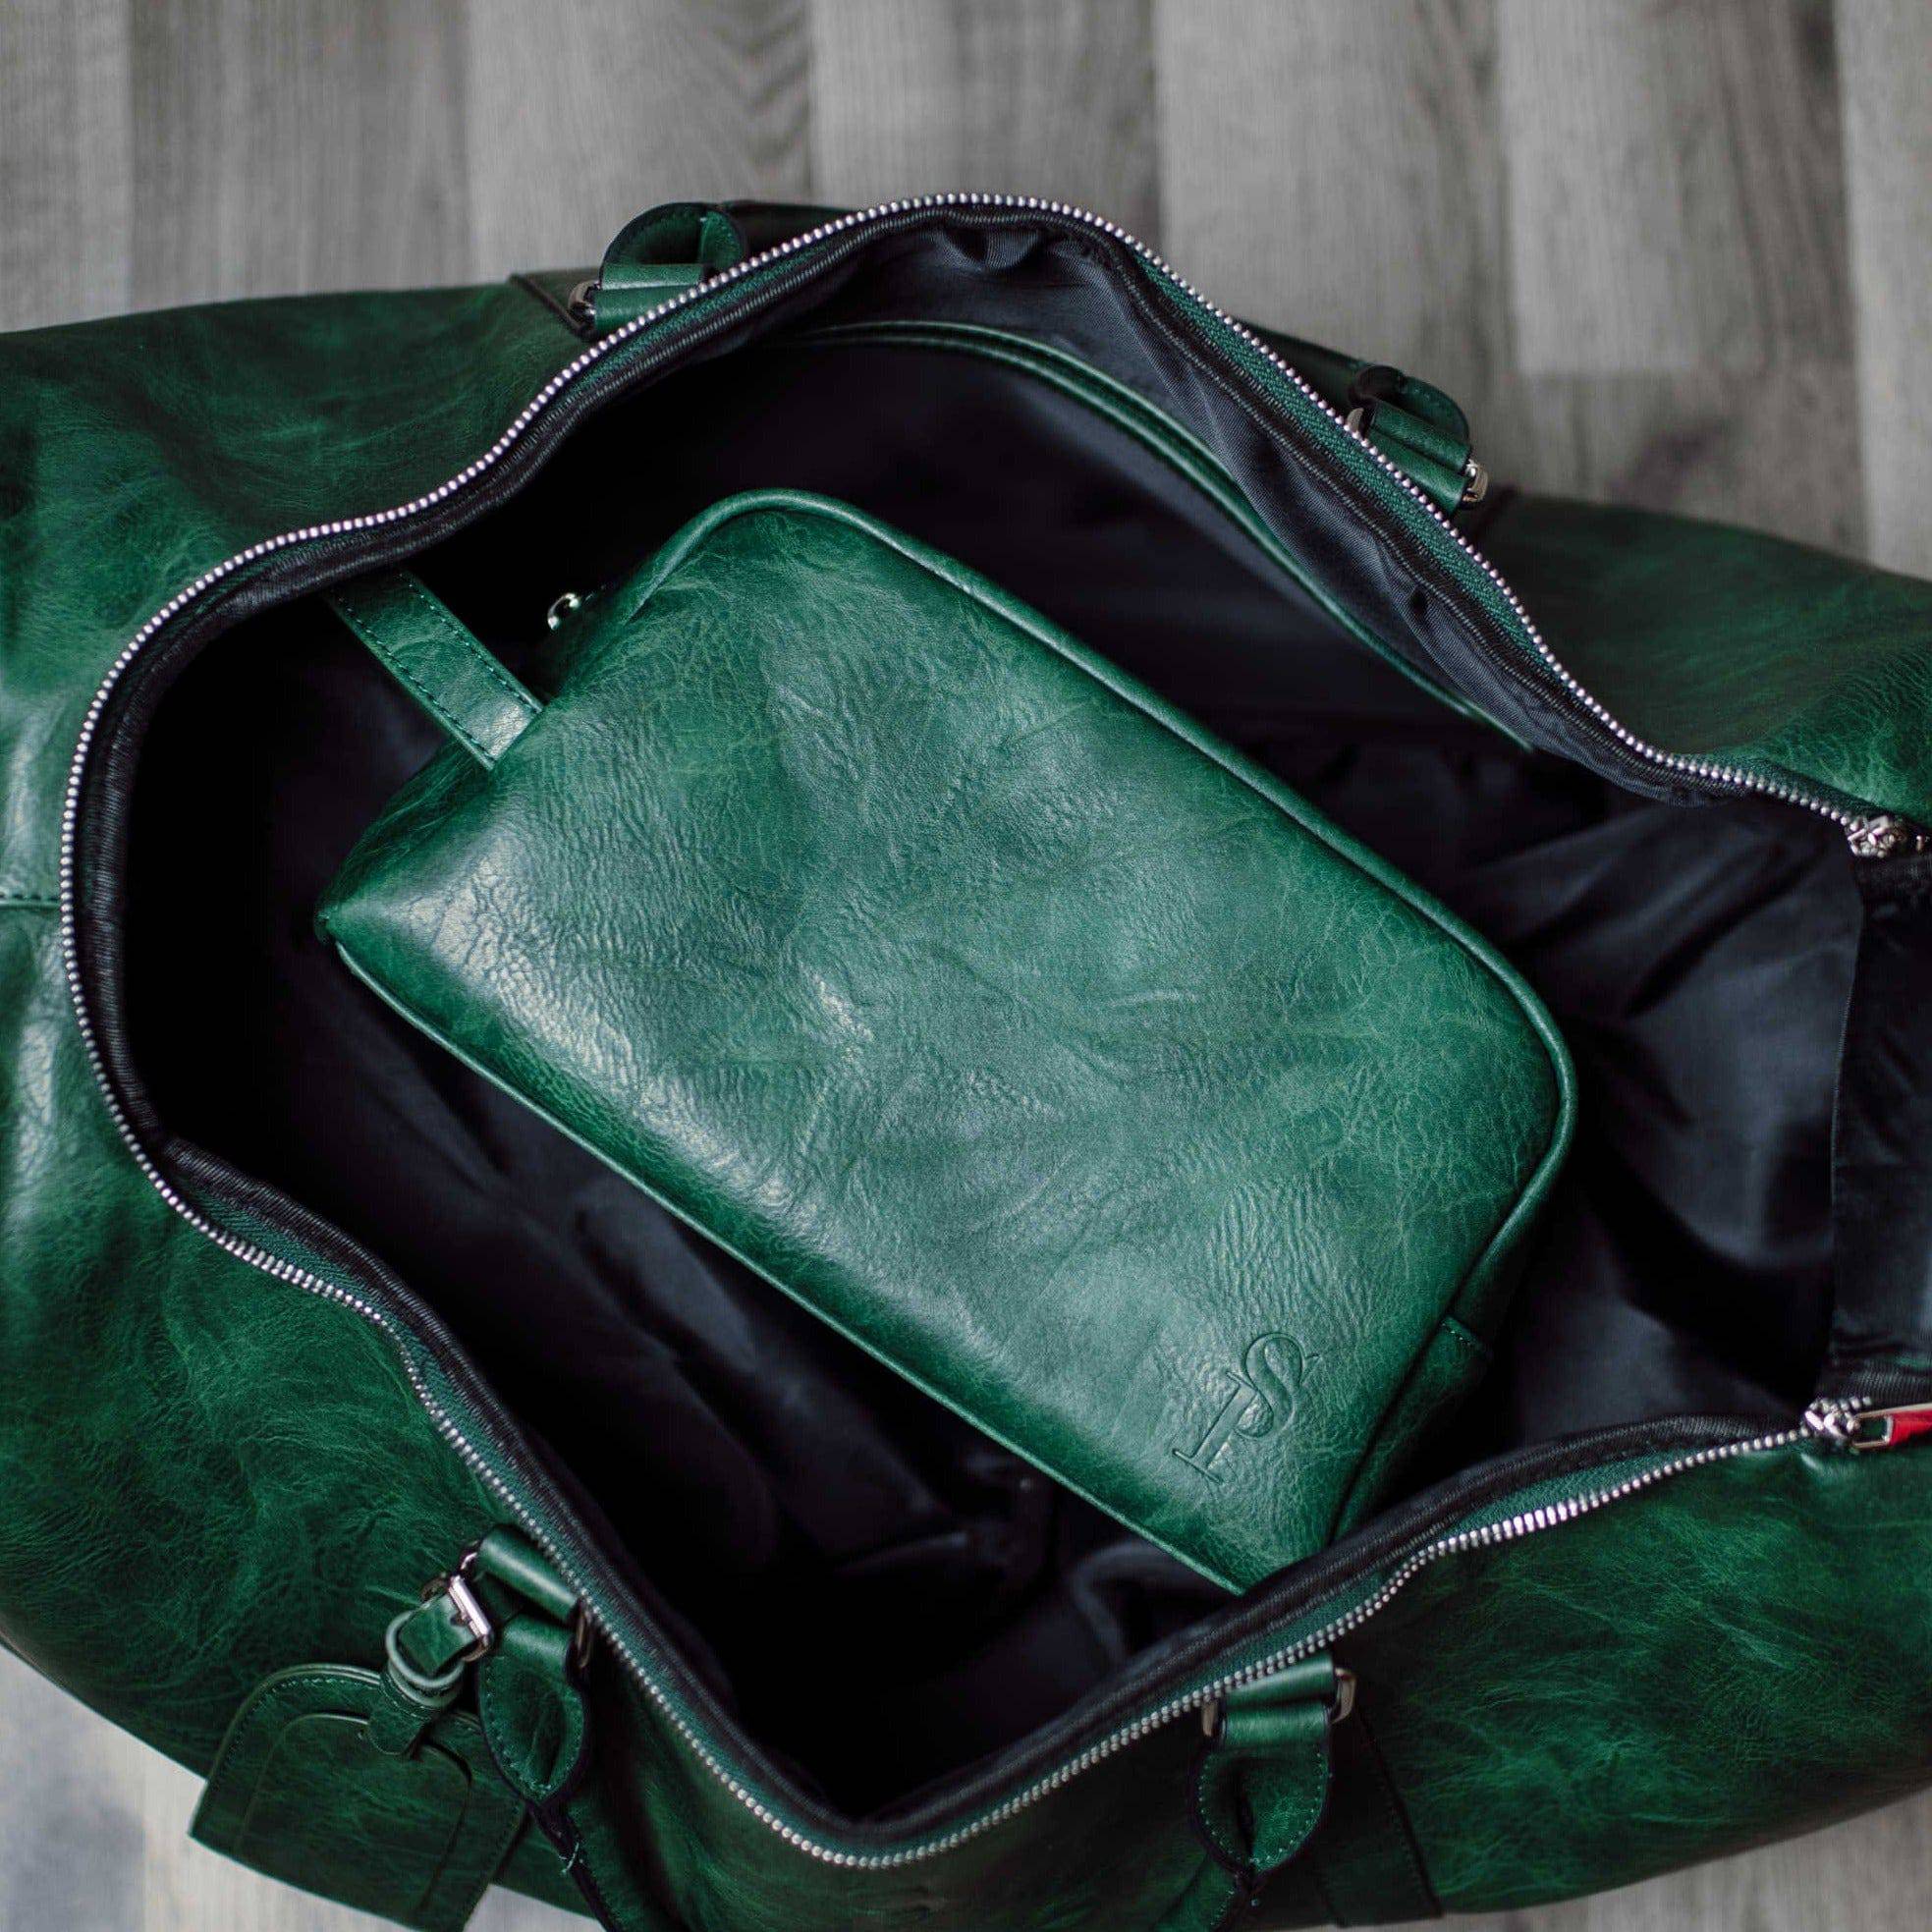 Emerald Green Leather Toiletry Bag - Sole Premise